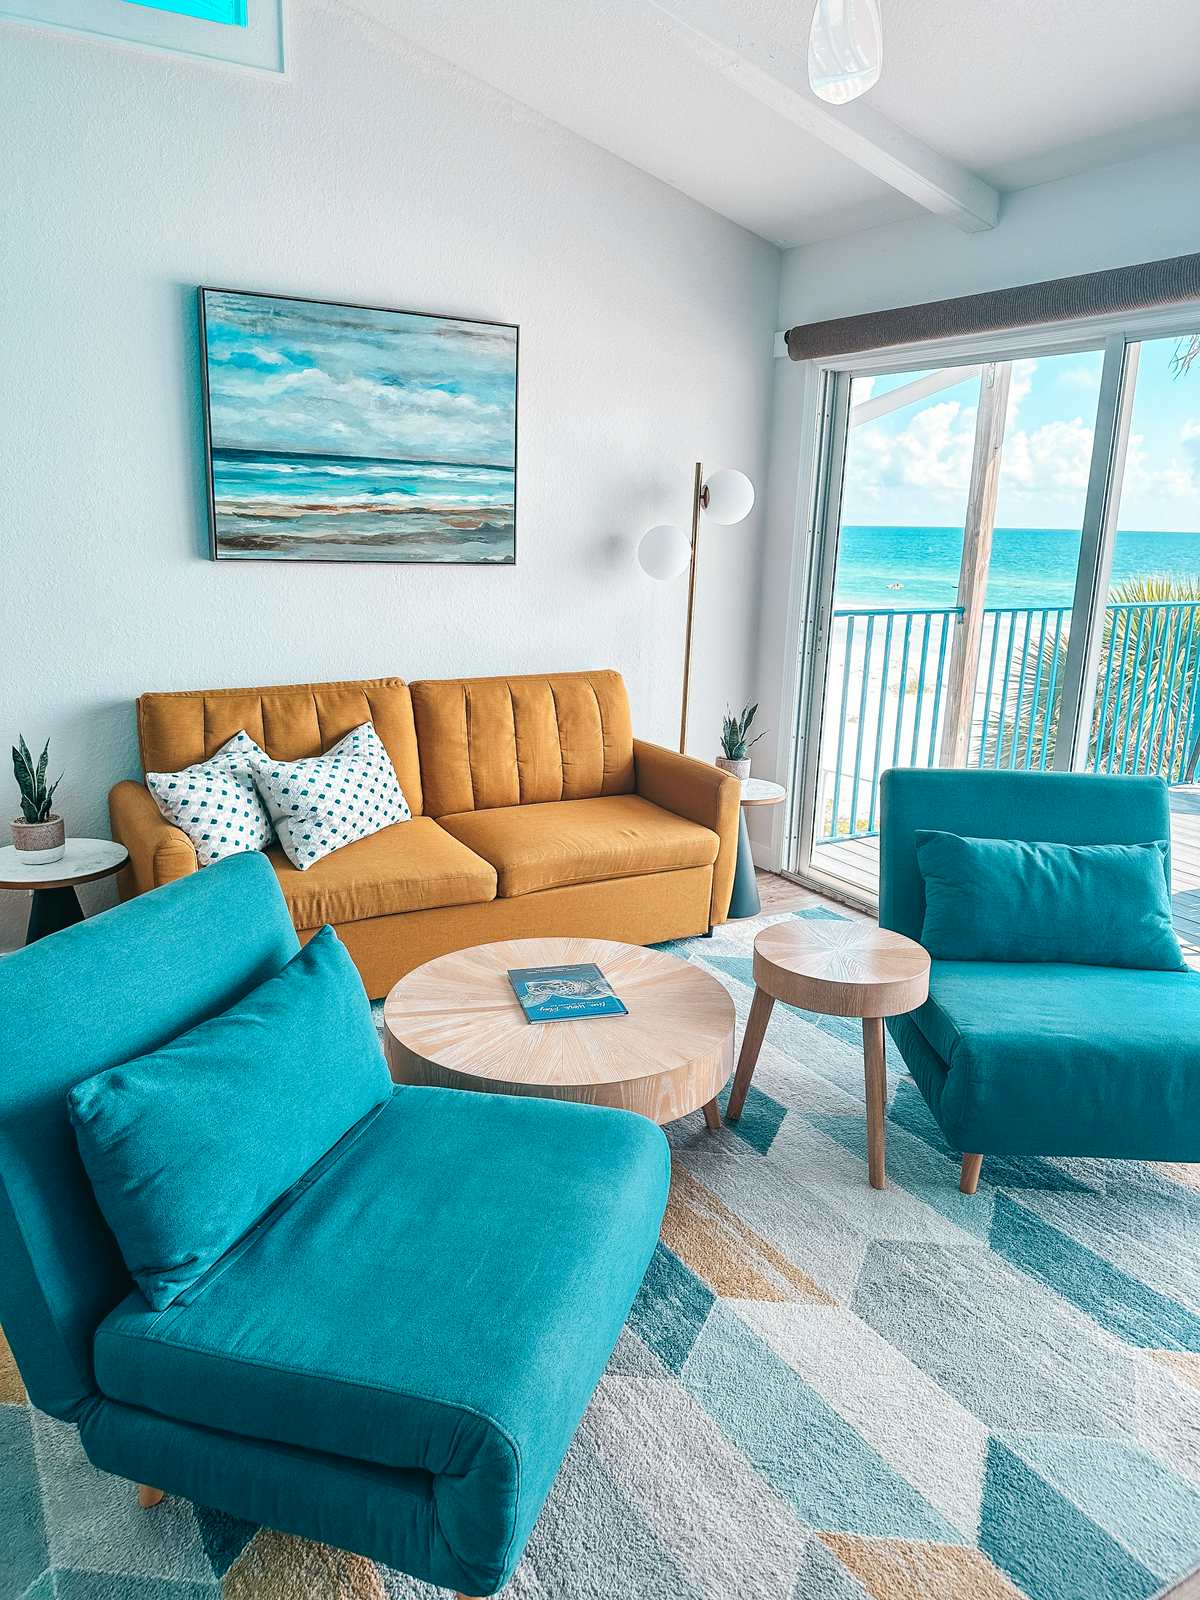 Penthouse suit living room at the Sunburst Inn Hotel on Indian Shores Beach